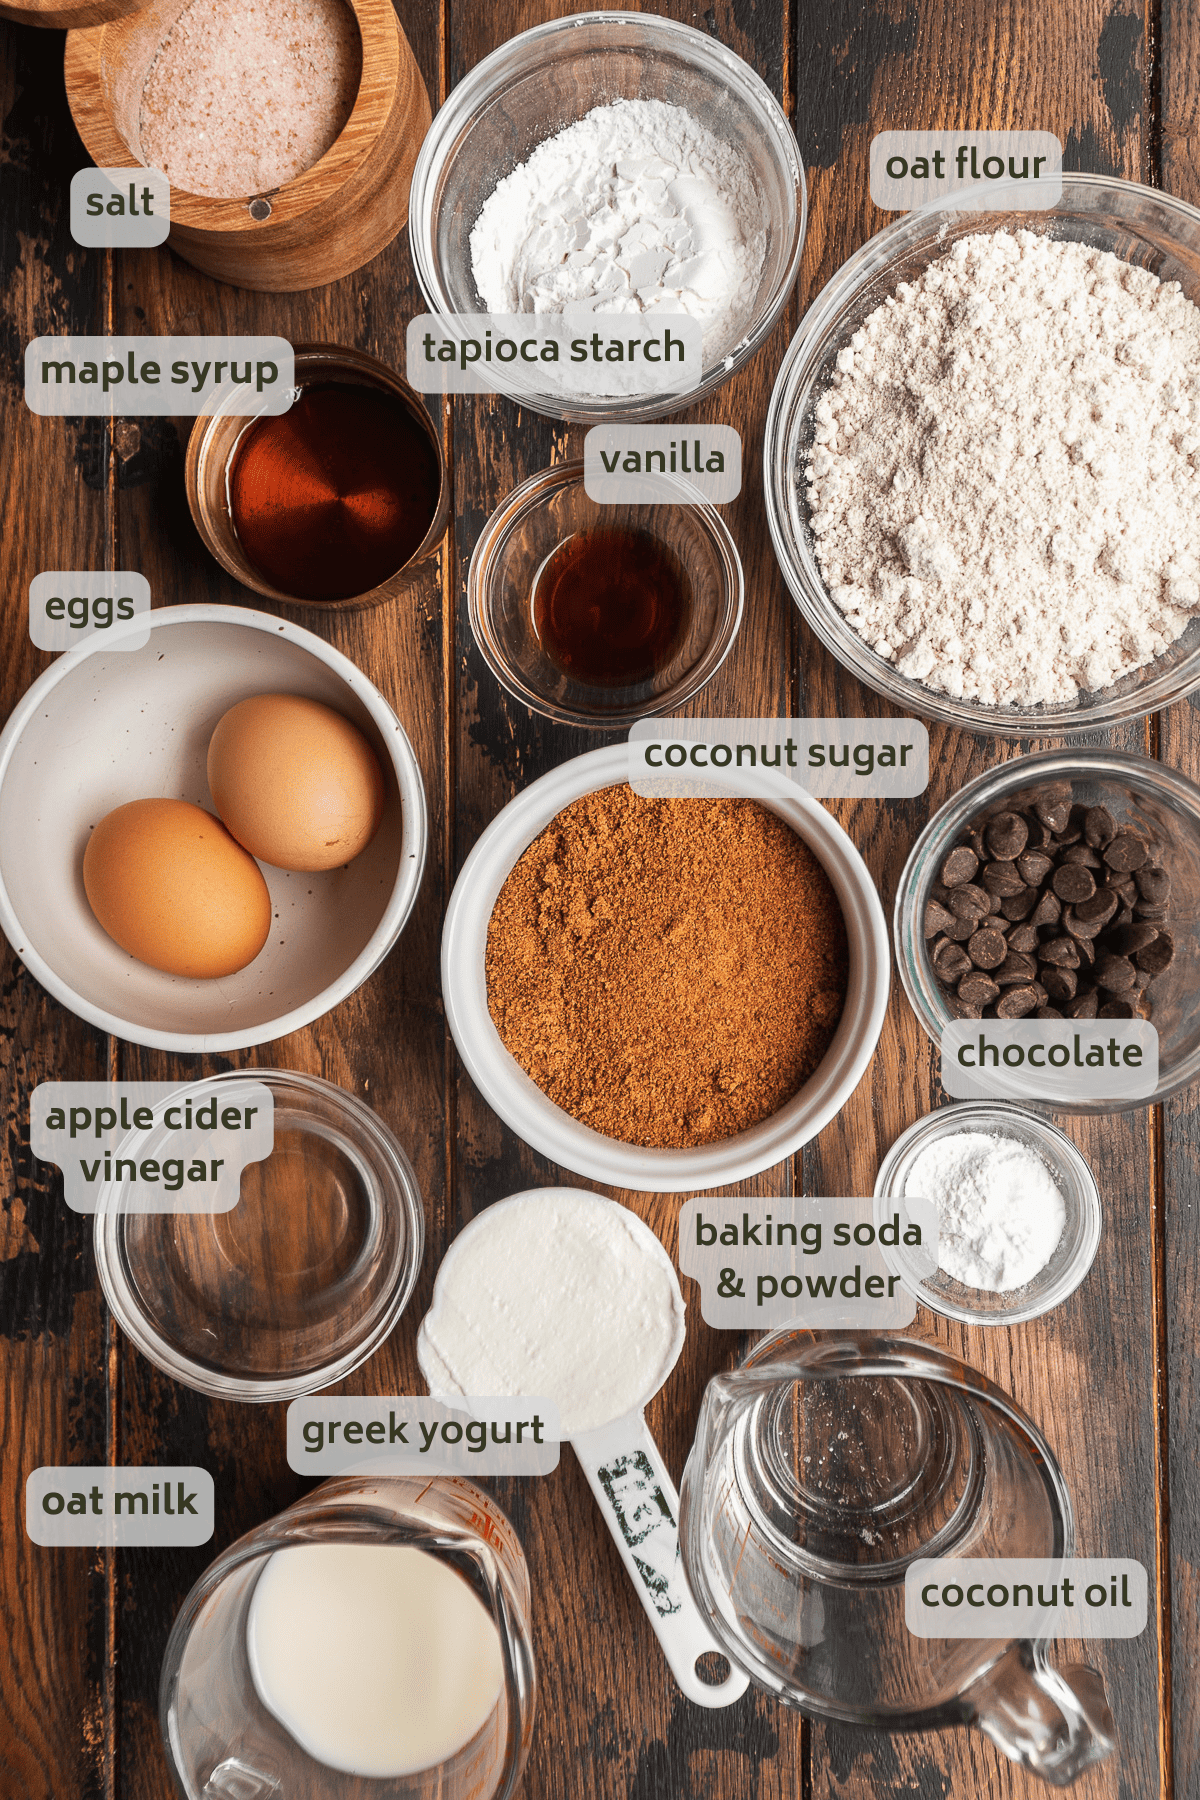 Oat flour cake ingredients on a wooden surface.